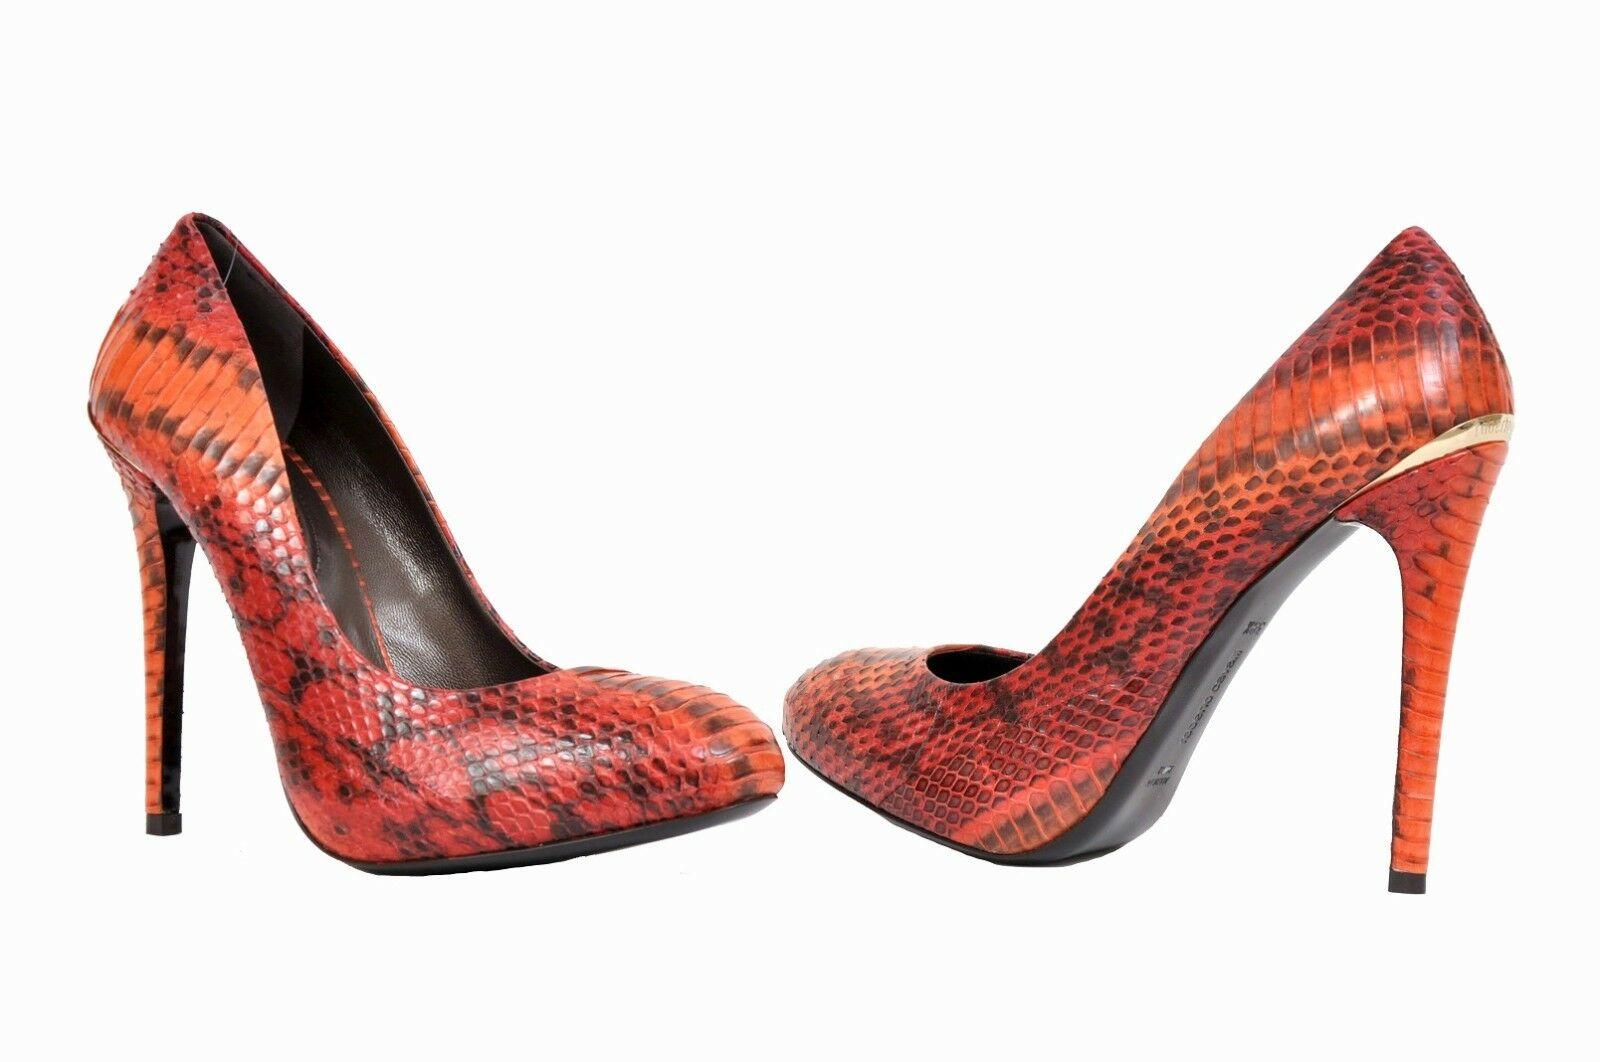 ROBERTO CAVALLI SHOES
Celebrate glamorous times with ROBERTO CAVALLI's chic, high-heeled Elaphe Multicolor Leather  Timbro Shoes.
 

Material: Elaphe Snakeskin Leather
Embellished with Gold Roberto Cavalli Badge
 Heel measures 5 